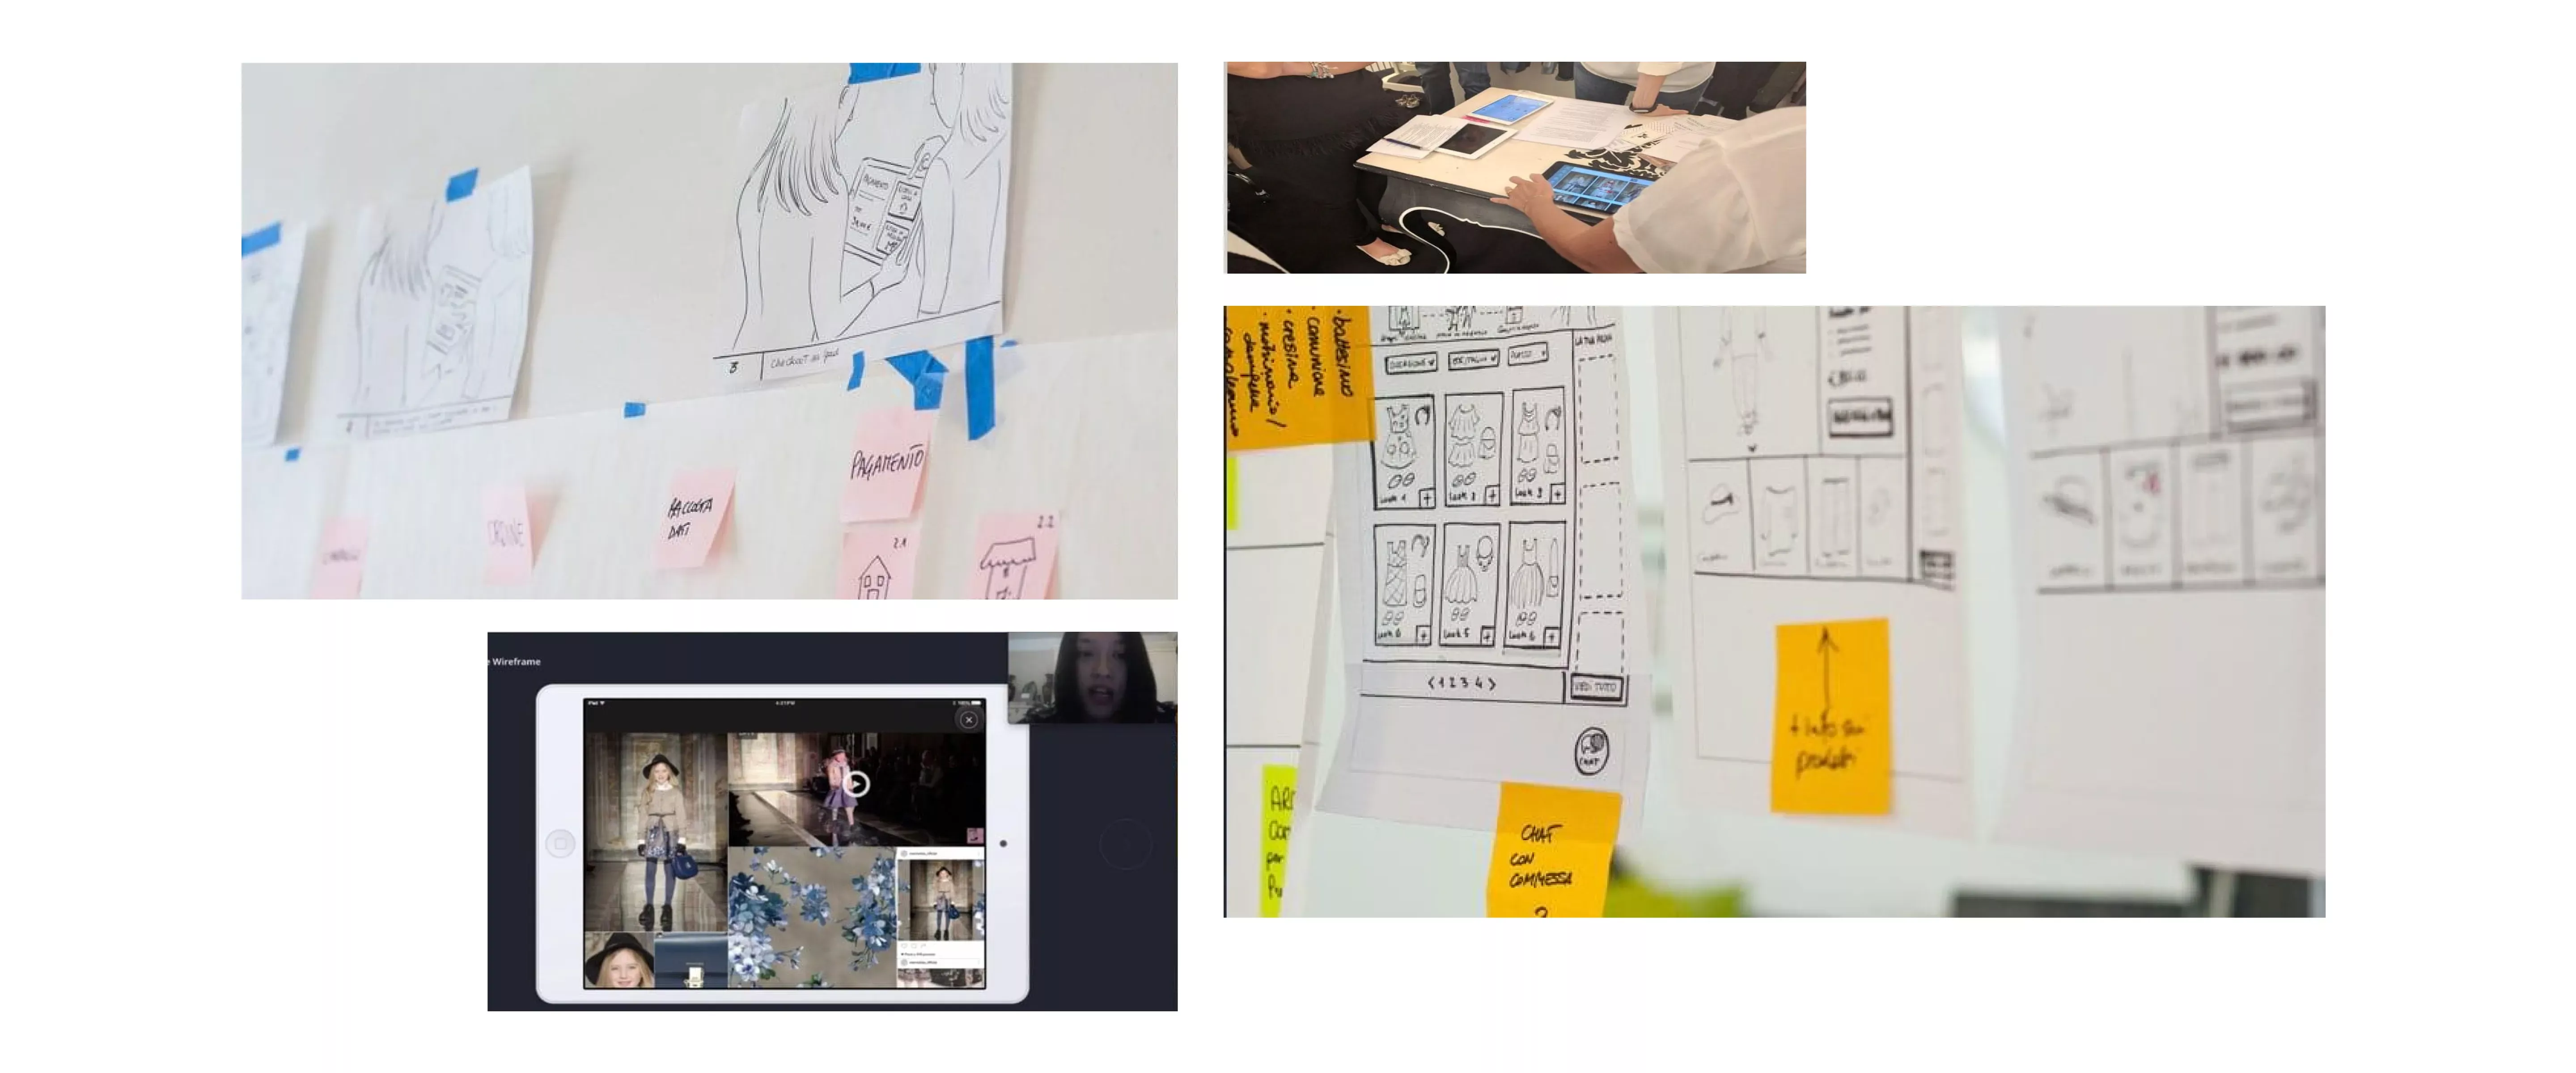 Sketches and prototype of the app